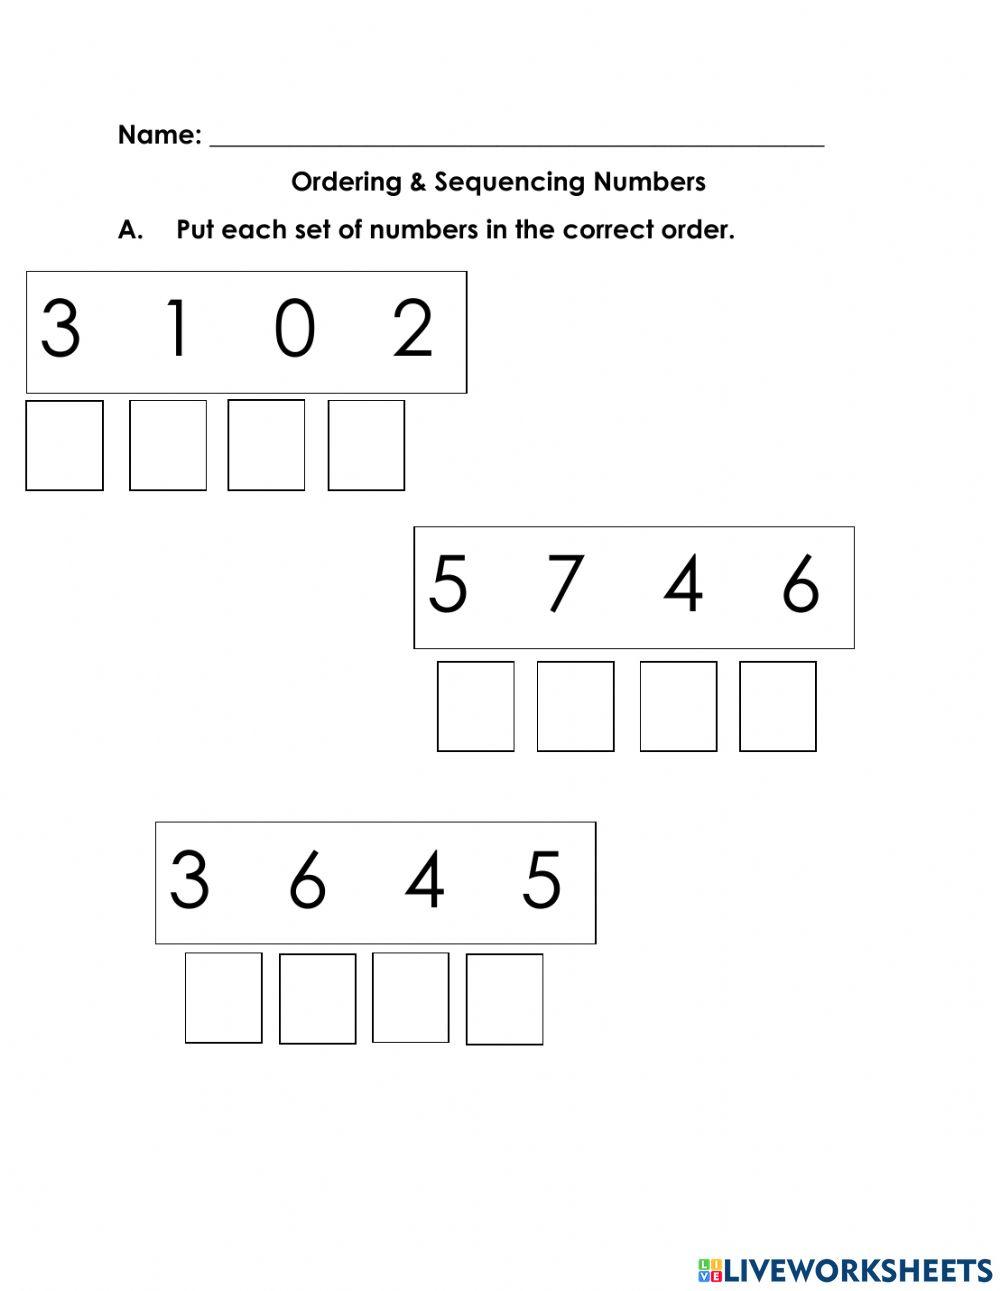 Ordering & Sequencing Numbers